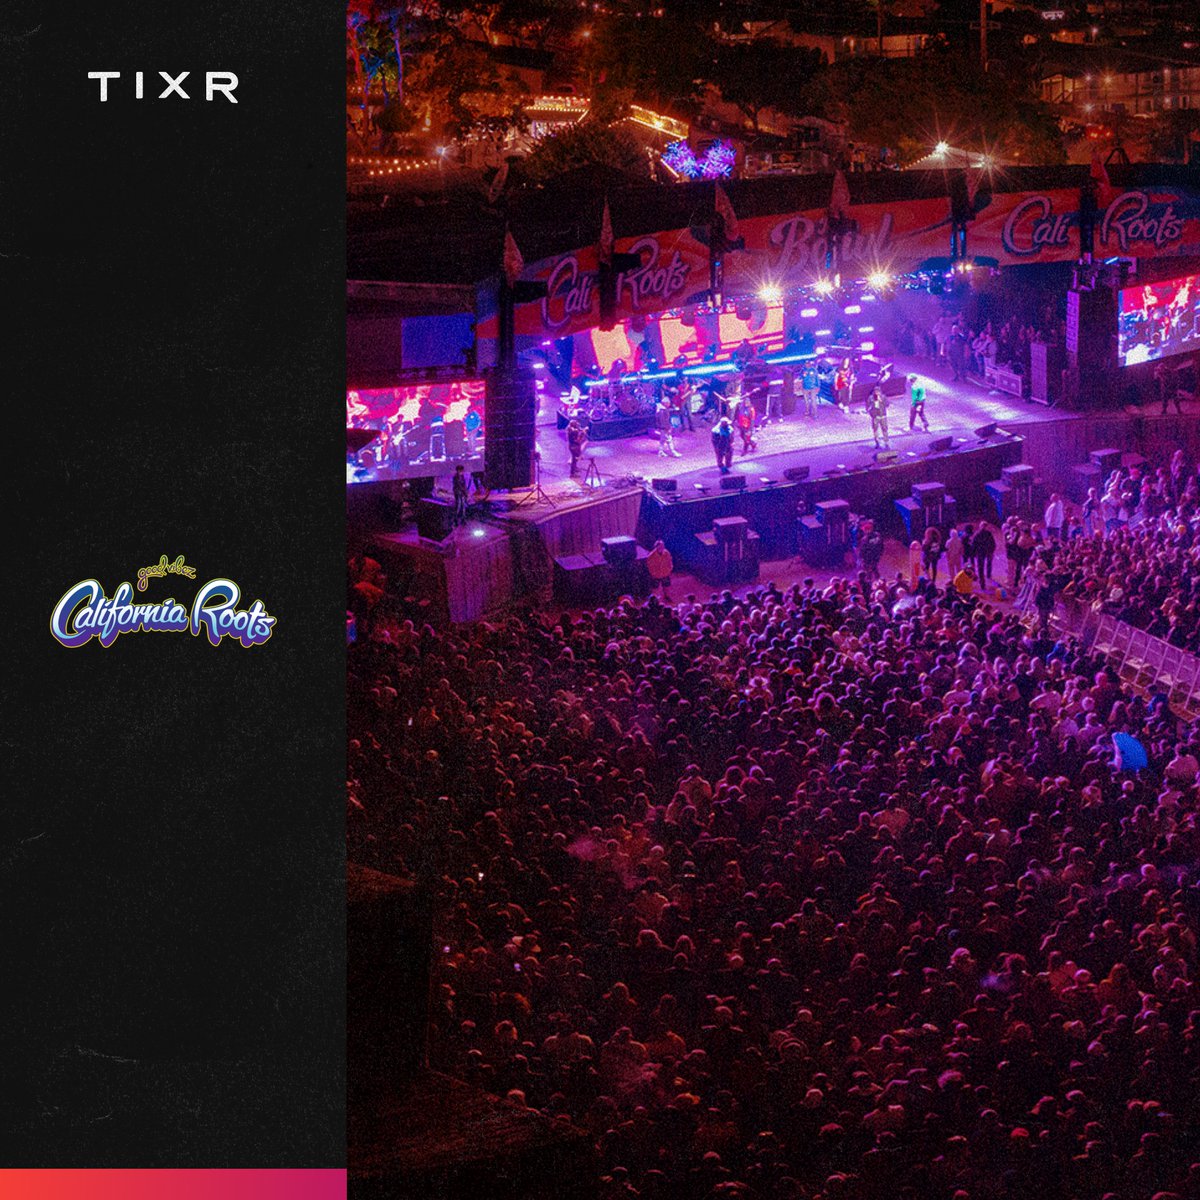 For over a decade, the @Calrootsfest has brought the best of reggae music to life in the Golden State. Attendees to the festival can purchase everything from GA and VIP passes to charging stations, merchandise, parking and more all on Tixr. See how Cali Roots is utilizing Tixr to